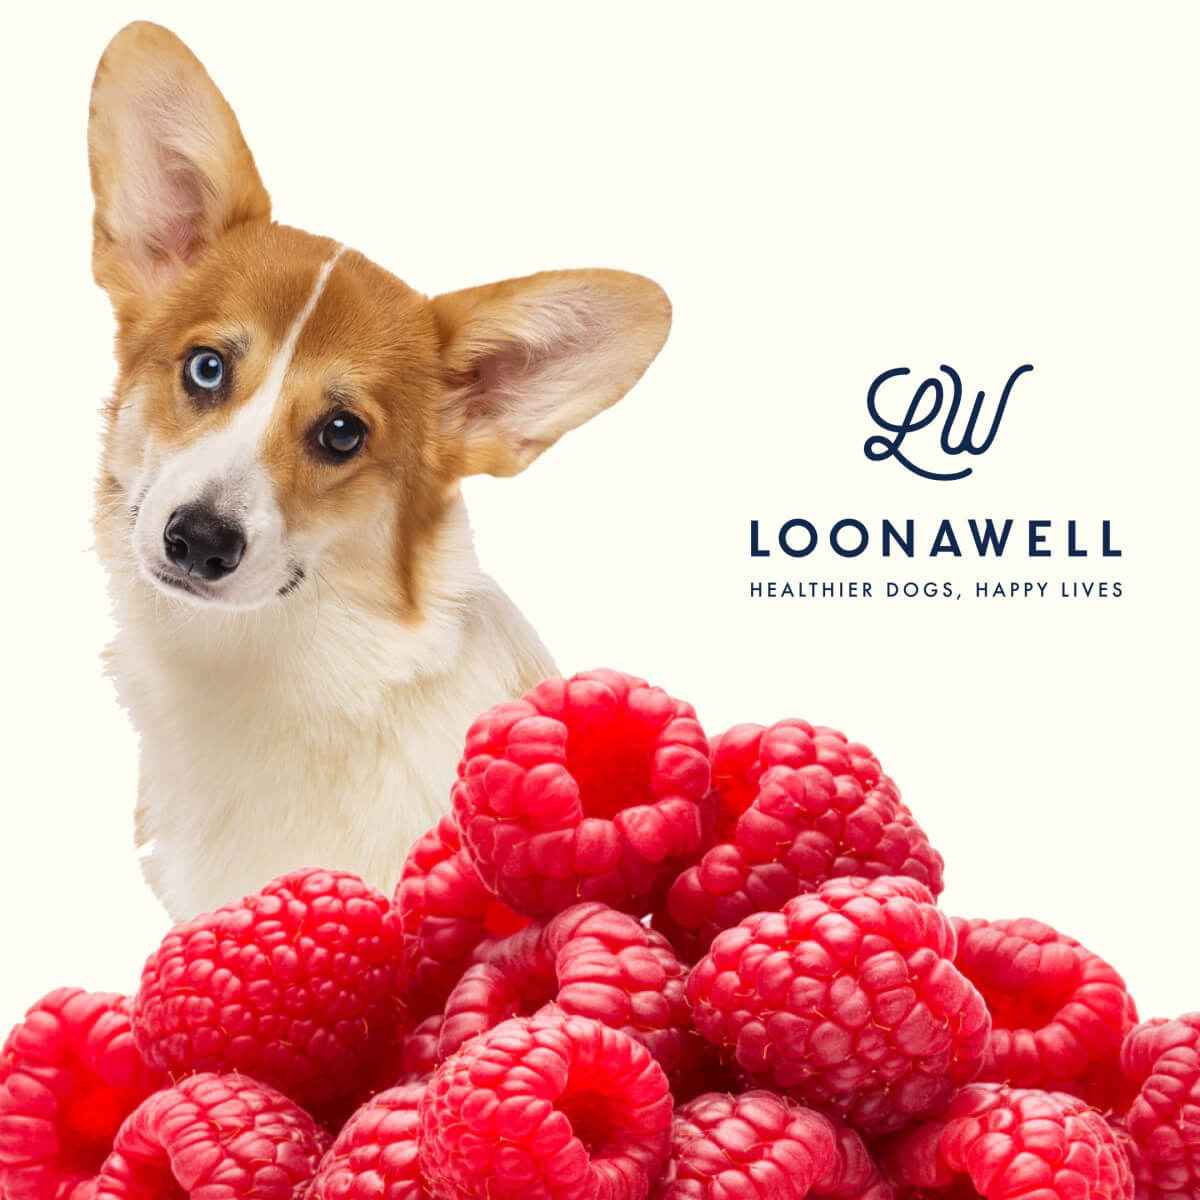 Raspberries for dogs: Small fruit with large benefits!